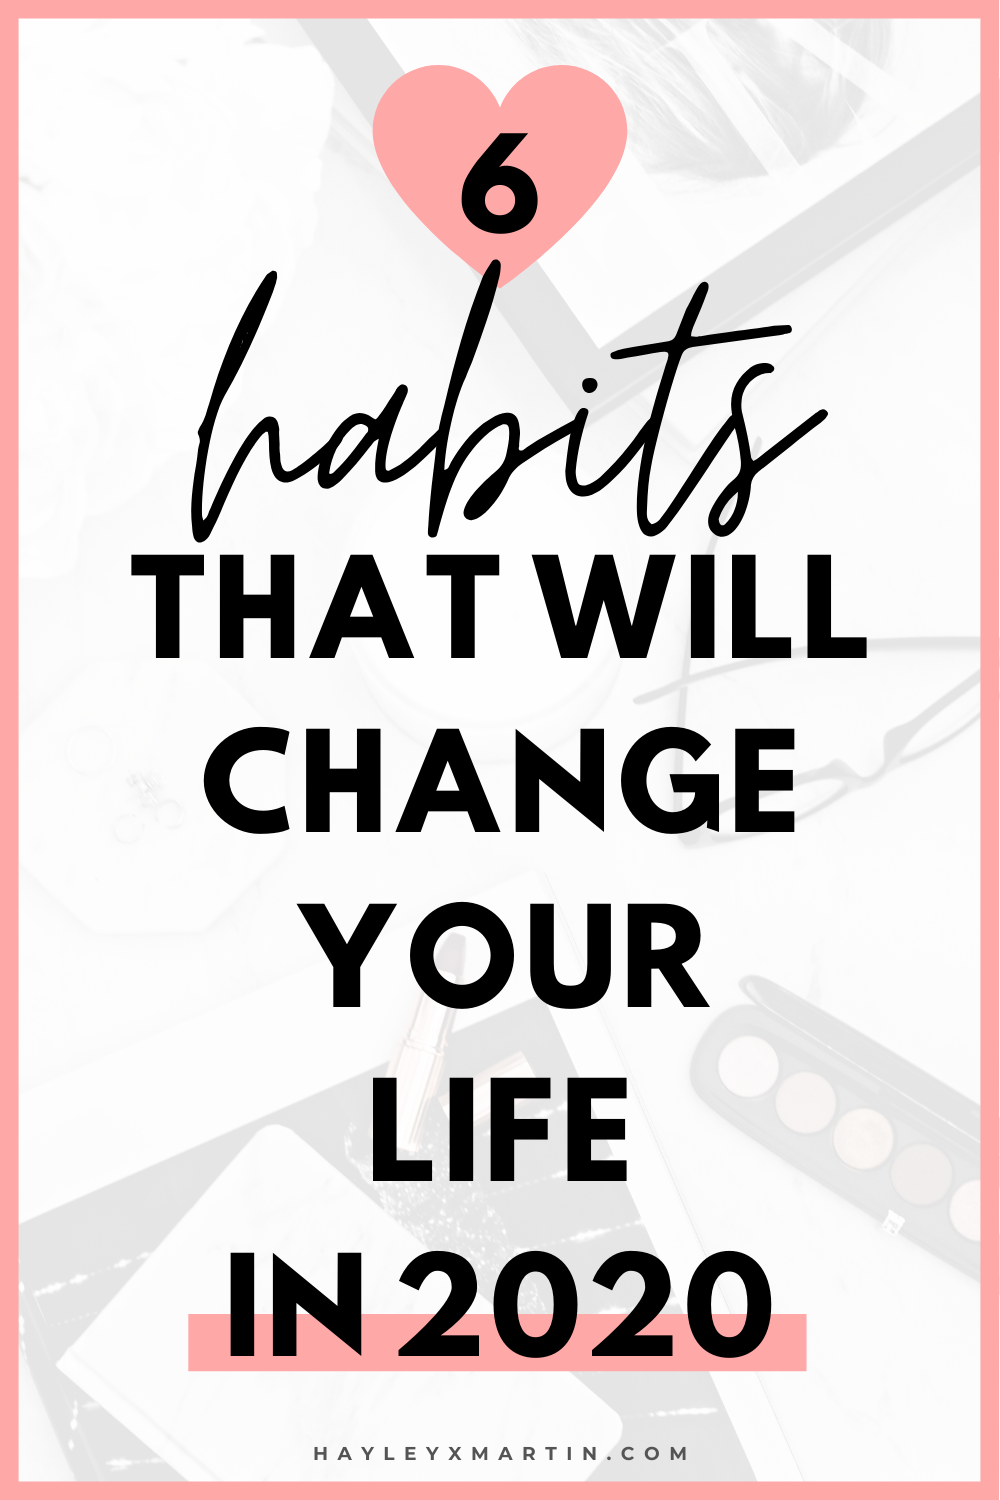 6 HABITS THAT WILL CHANGE YOUR LIFE IN 2020 | HAYLEYXMARTIN